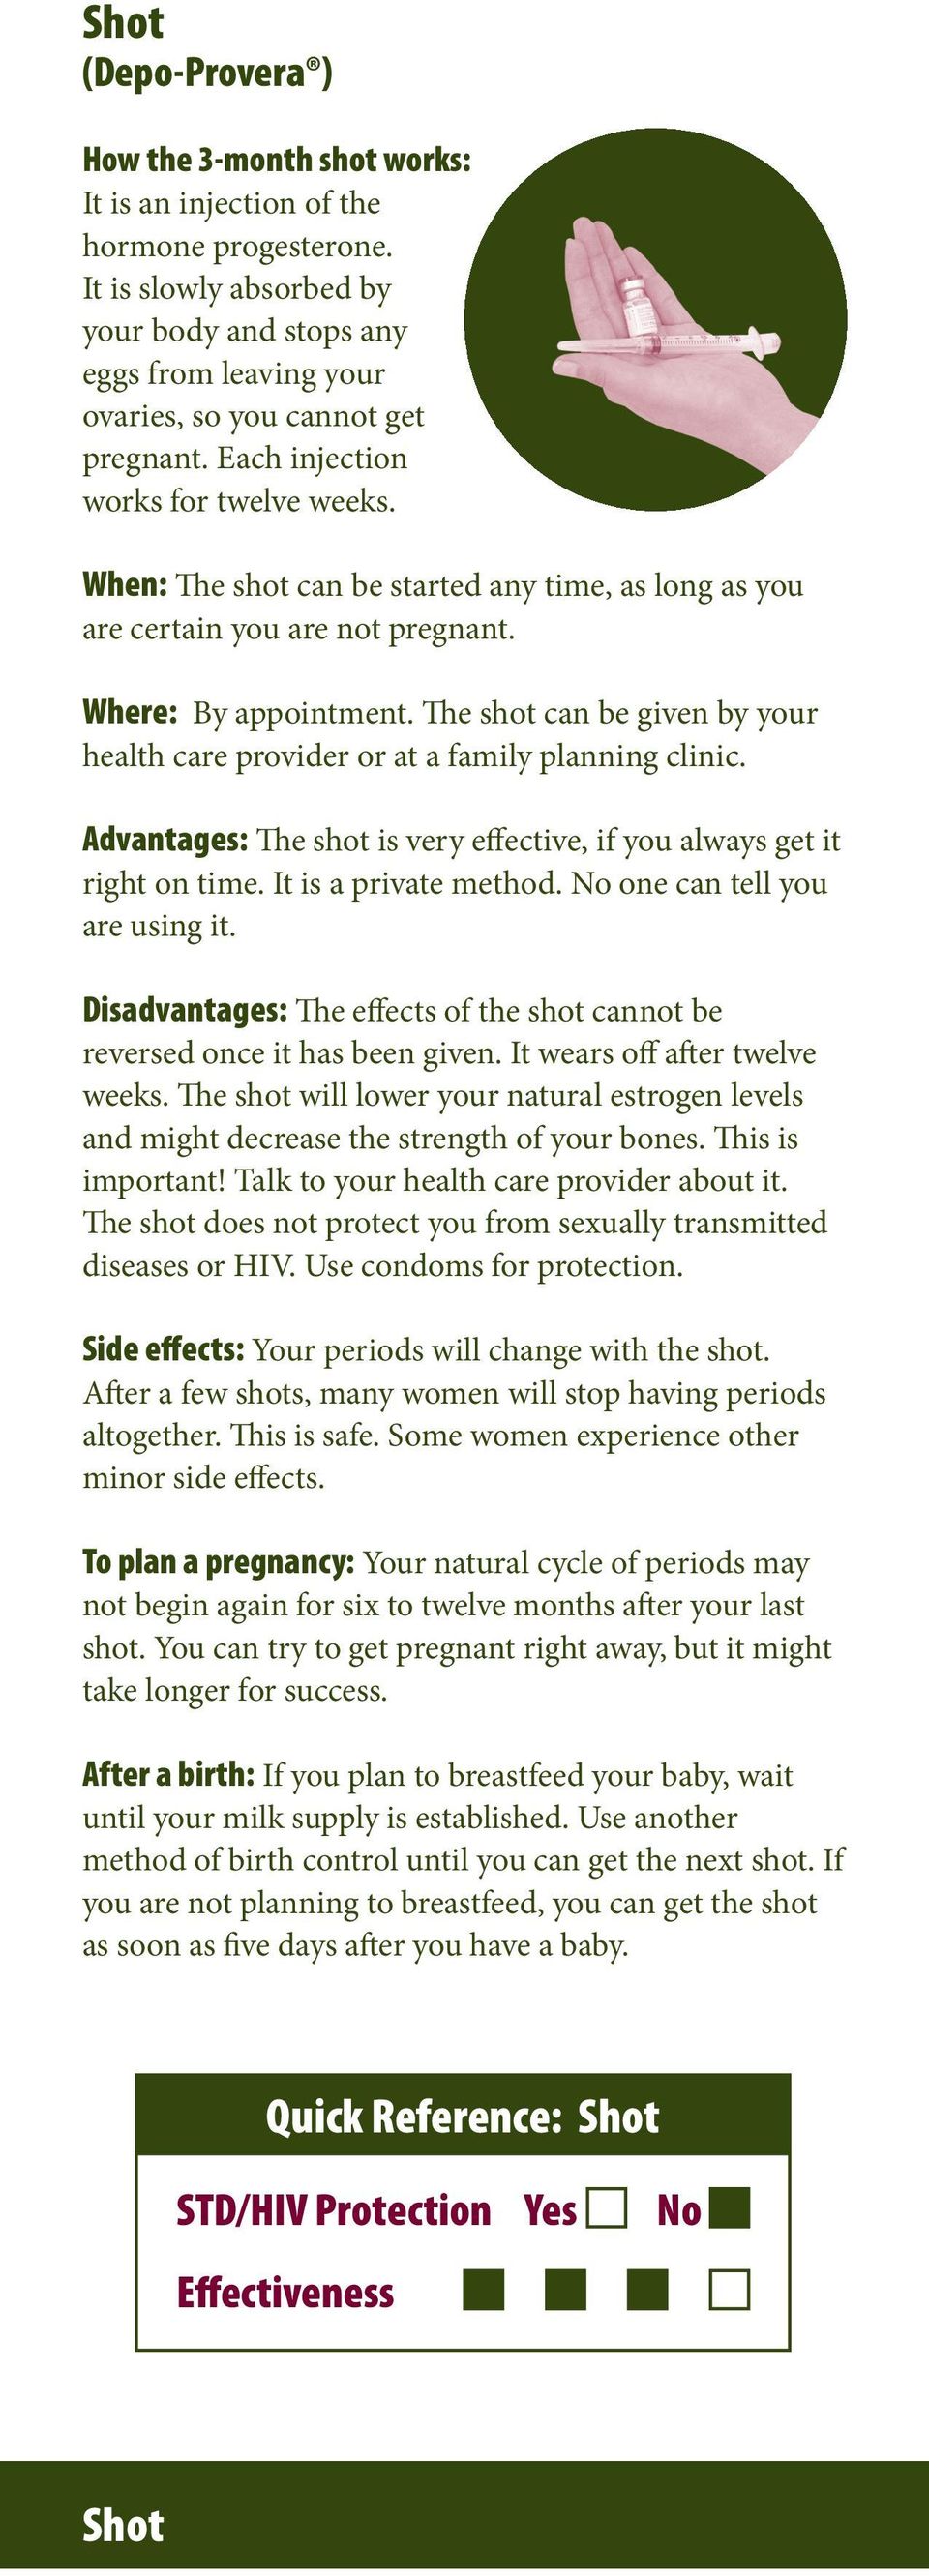 When: The shot can be started any time, as long as you are certain you are not pregnant. Where: By appointment. The shot can be given by your health care provider or at a family planning clinic.